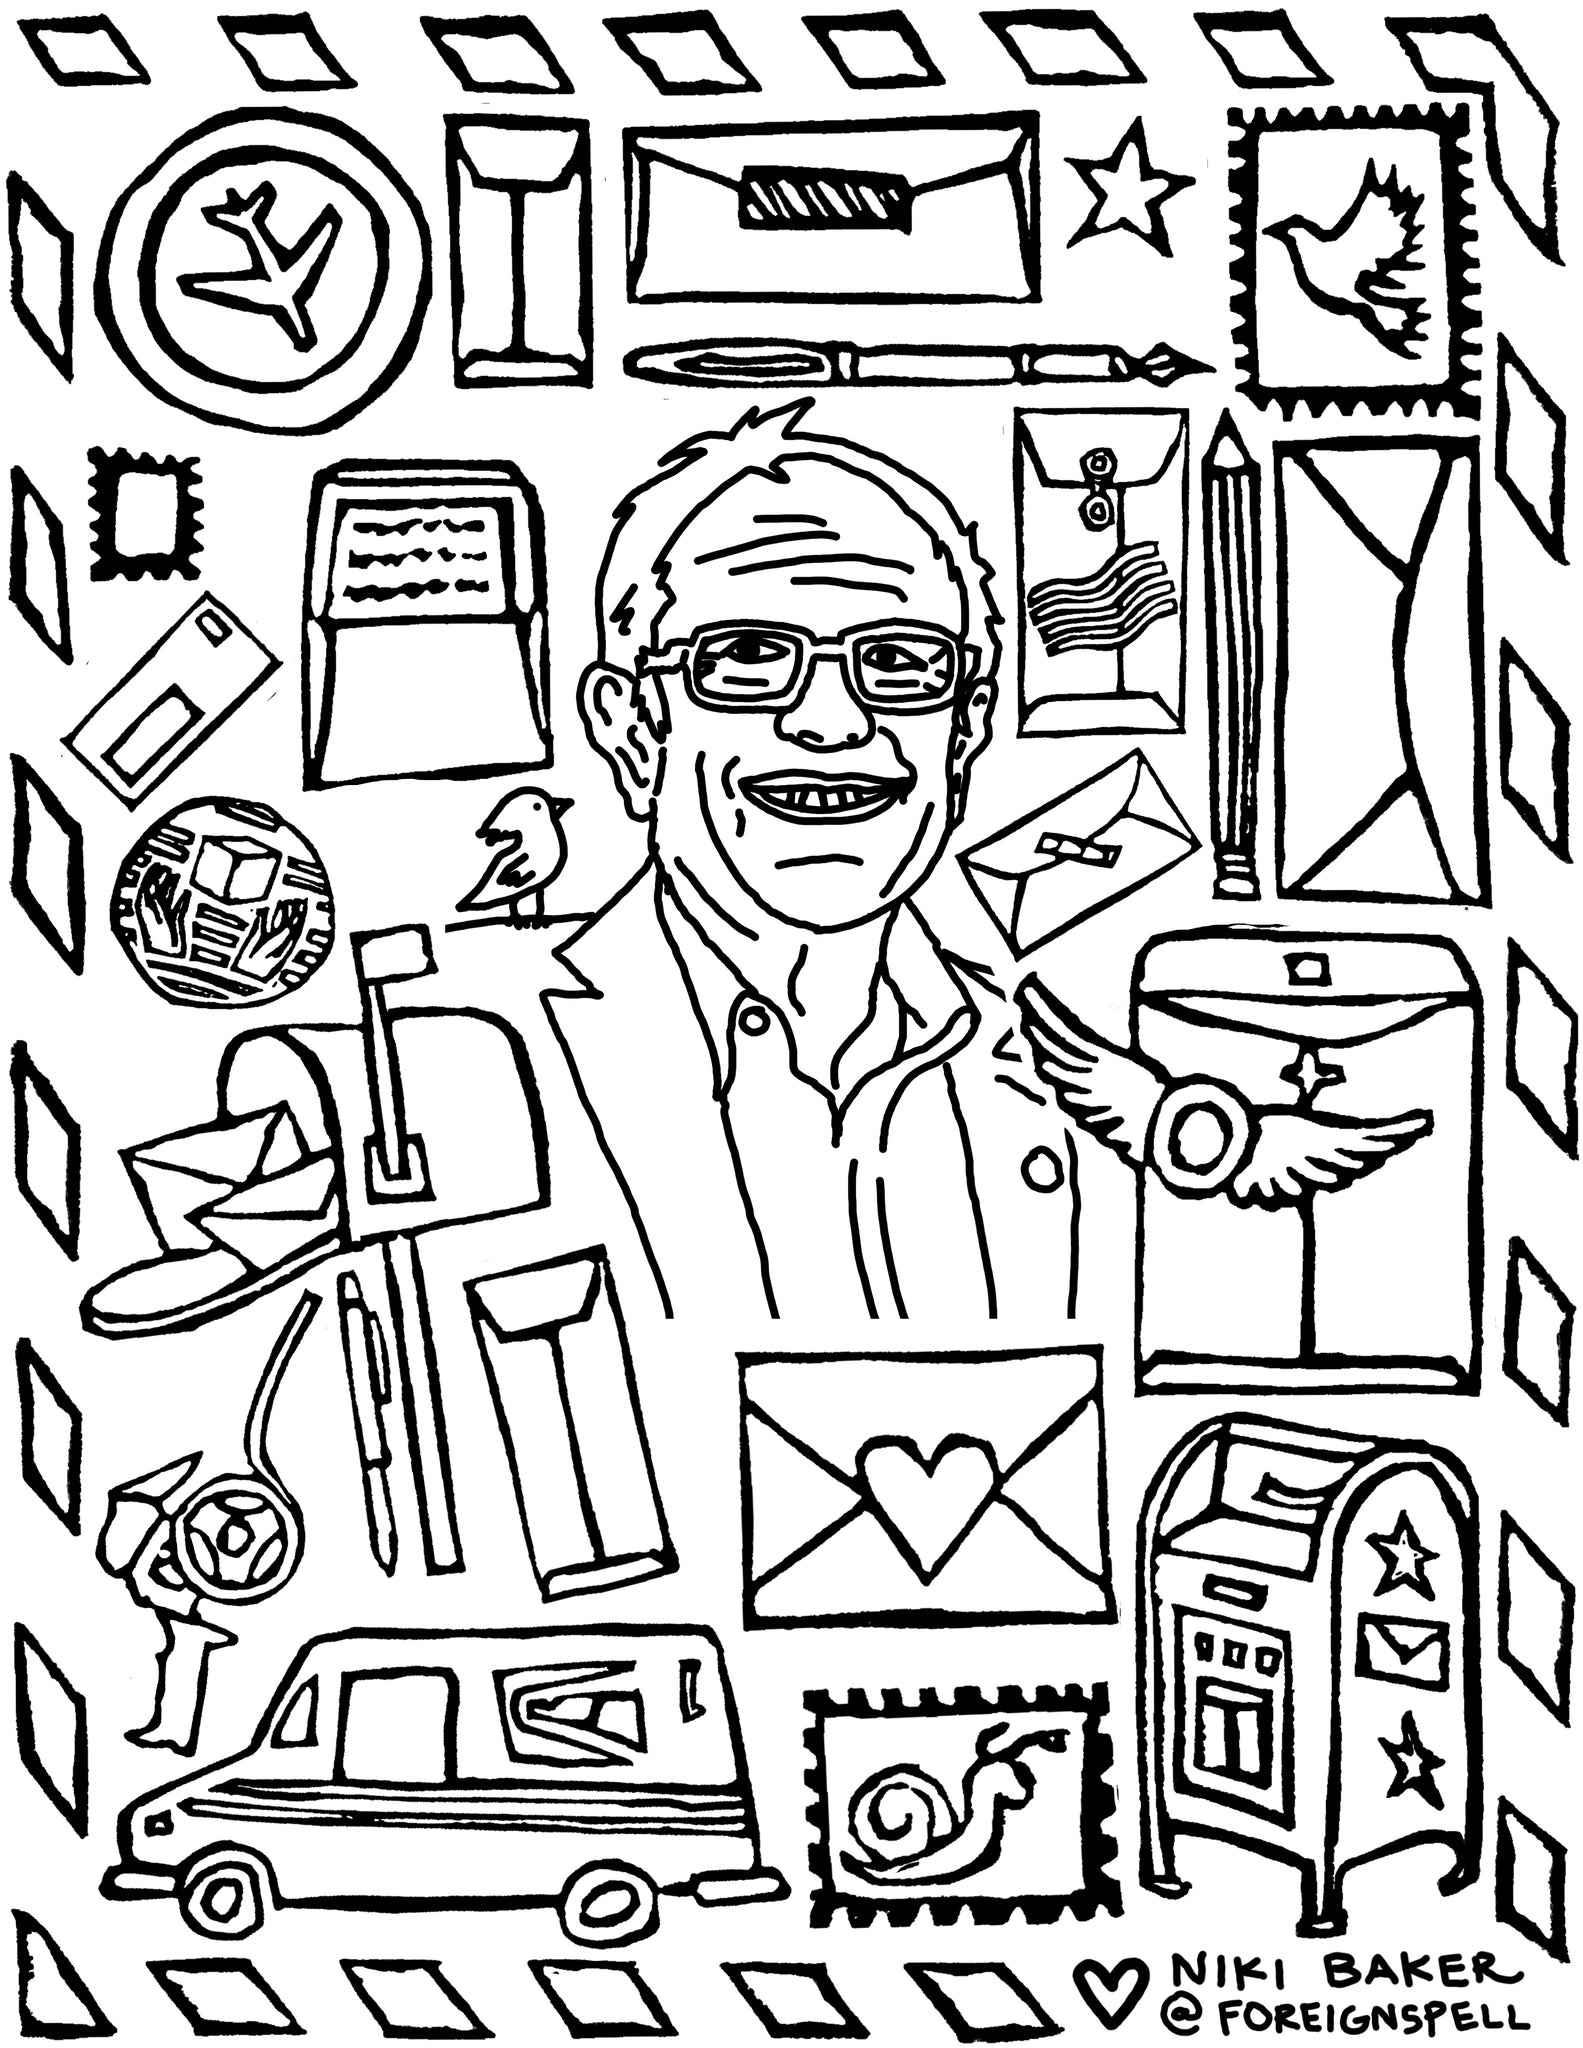 Bernie Sanders Self-Care Activity Book Coloring Page